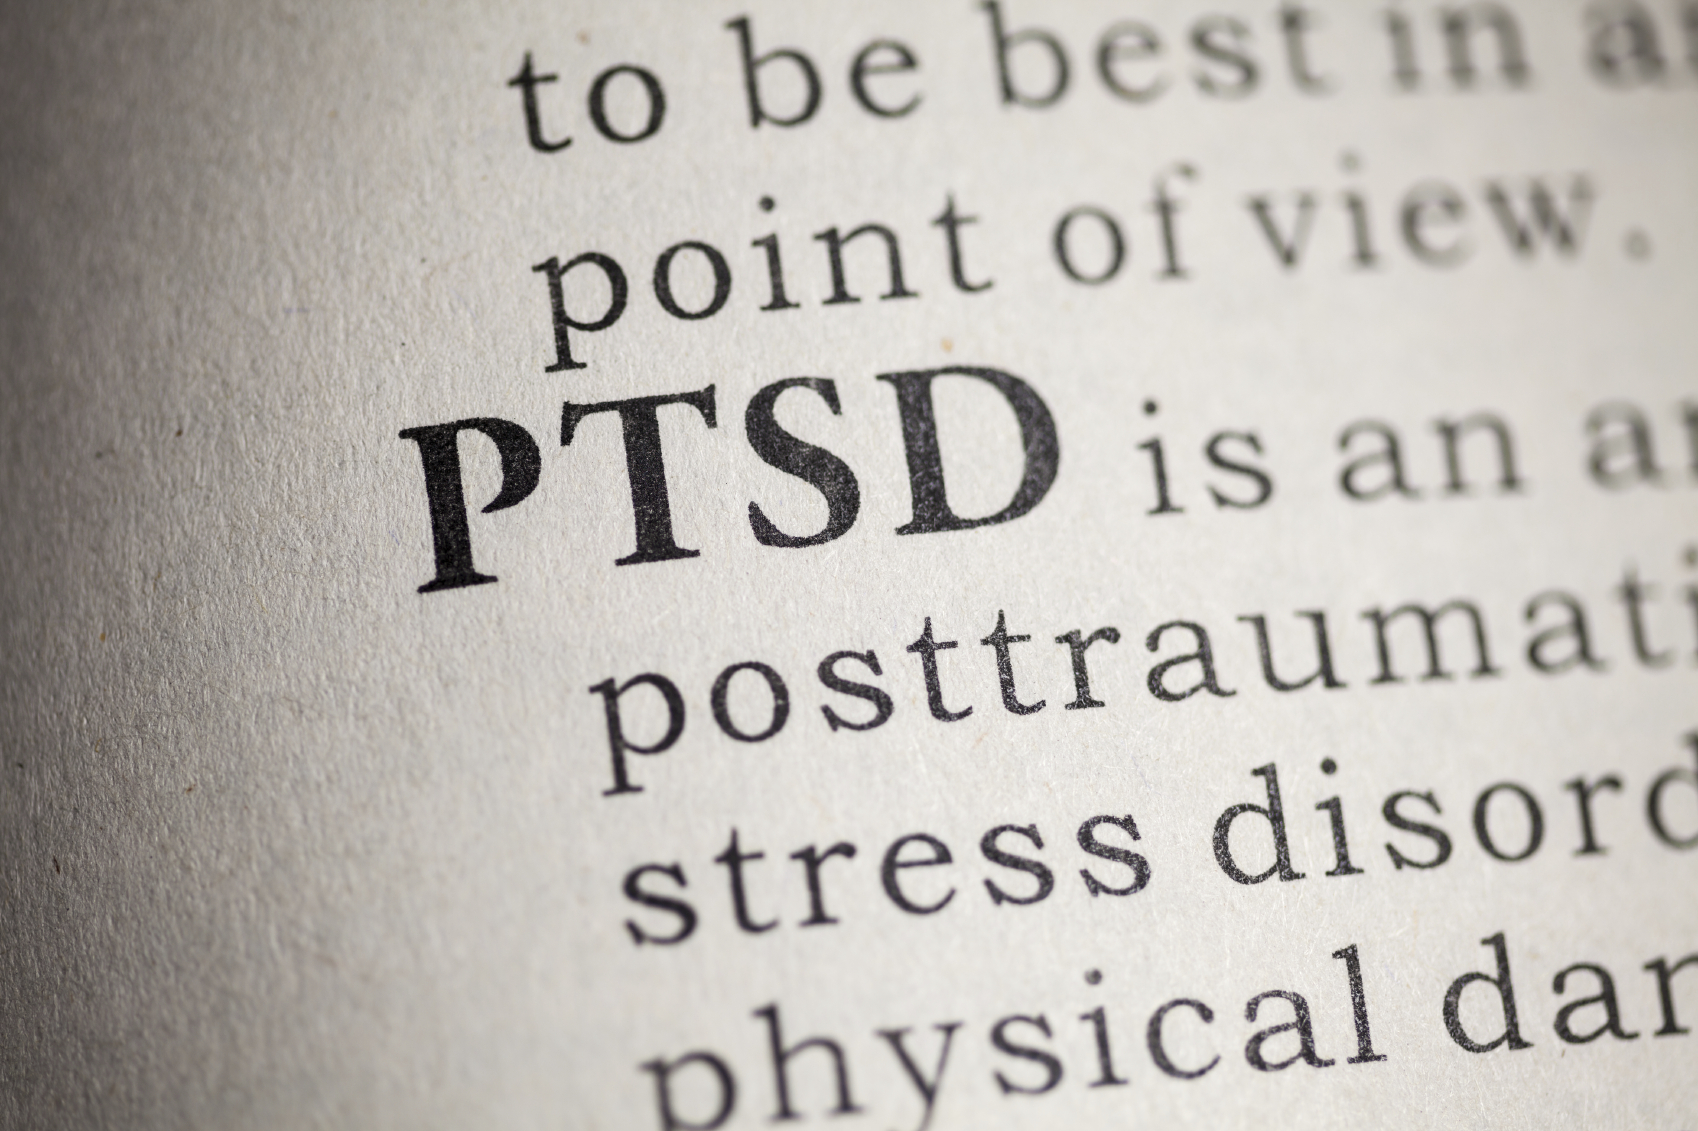 The Post Traumatic Stress Disorder